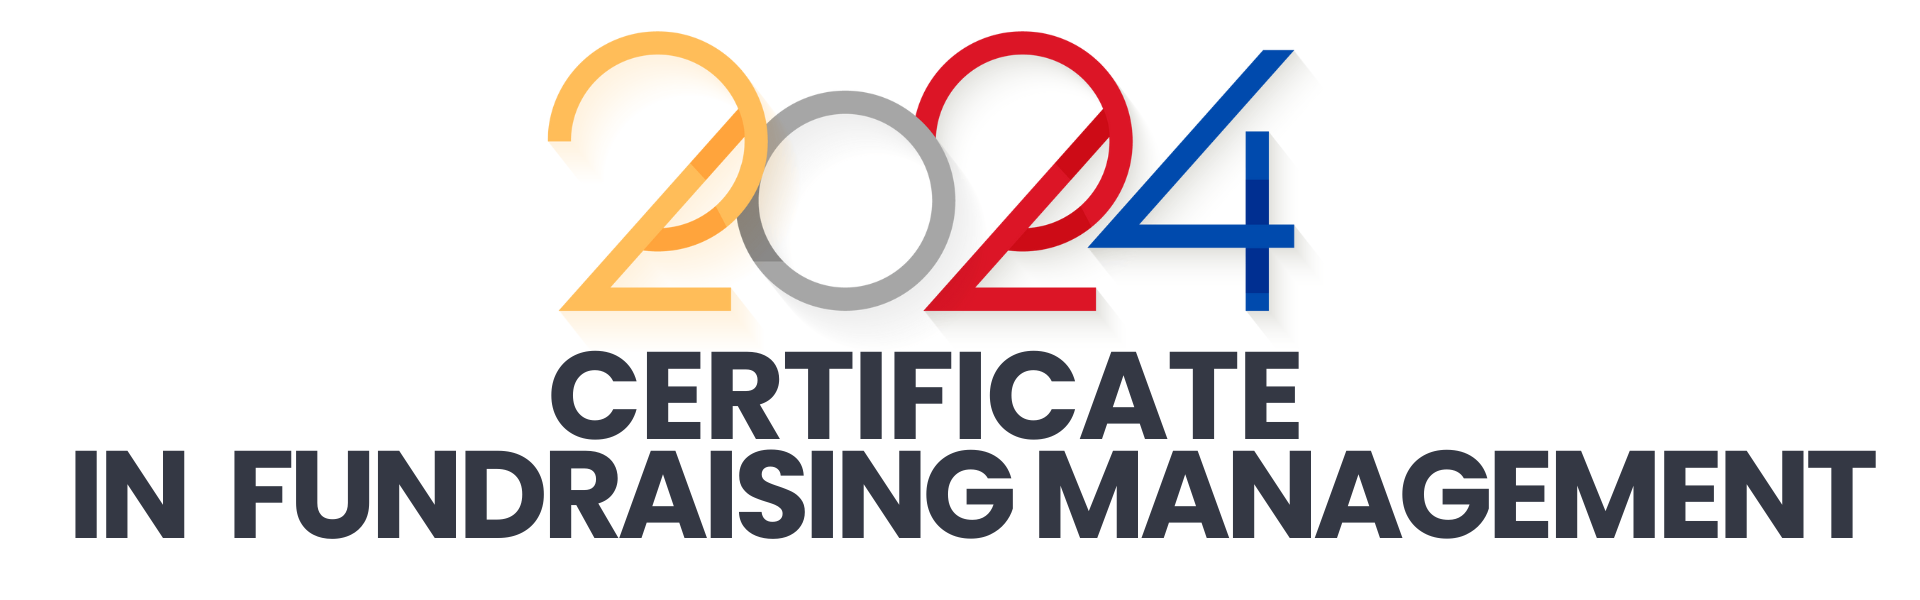 certificate-in-fundraising-management-v2-2024.png